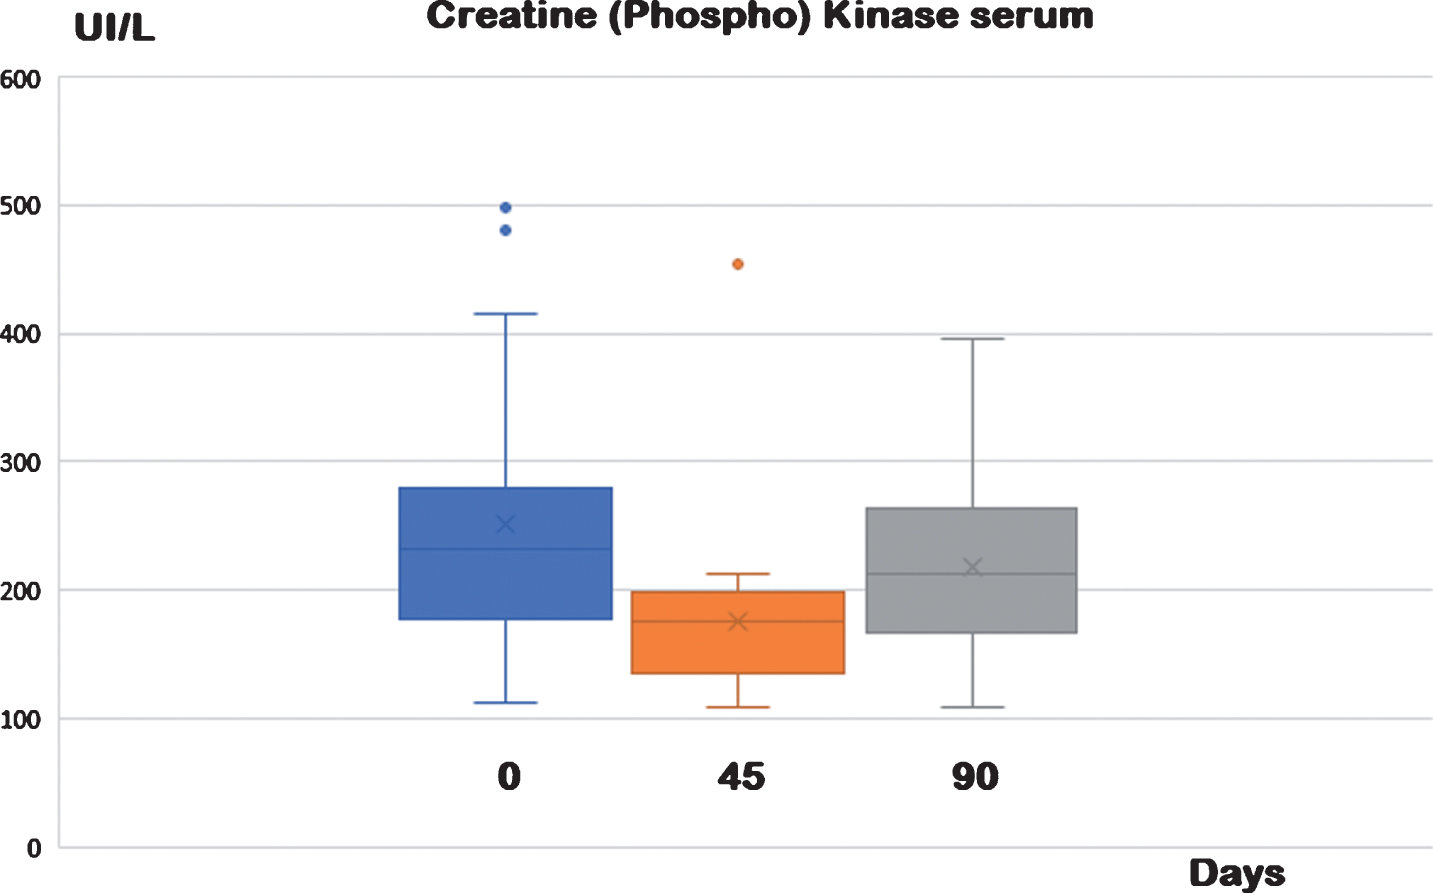 Serum Creatine phosphokinase at different times and treatments. Animals were observed for two consecutive periods of 45 days, where the basic diet was added or not with a food supplement containing antioxidants (30 mg resveratrol and 20 UI α-tocopherol acetate). Creatin phosphokinase is considered a good biomarker for sarcopenia in dogs. After 45 days of supplementation, there was a statistically significant reduction of serum concentrations of creatin phosphokinase, (see Table 2). These values returned to baseline after a further 45 days of basal diet without supplementation (control).